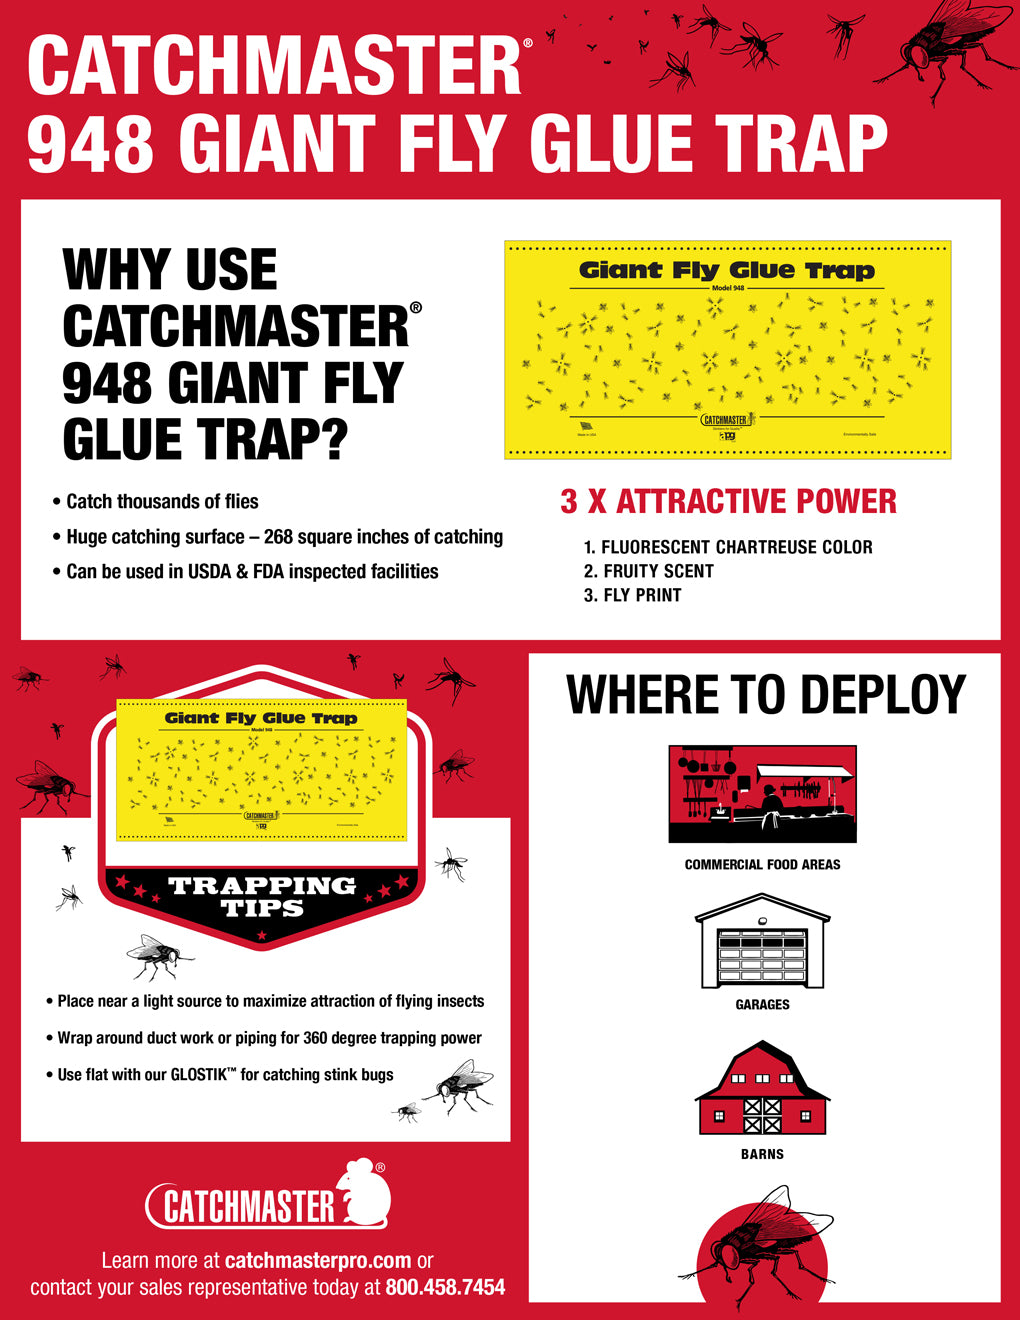 Giant Fly Glue Trap with Attractant